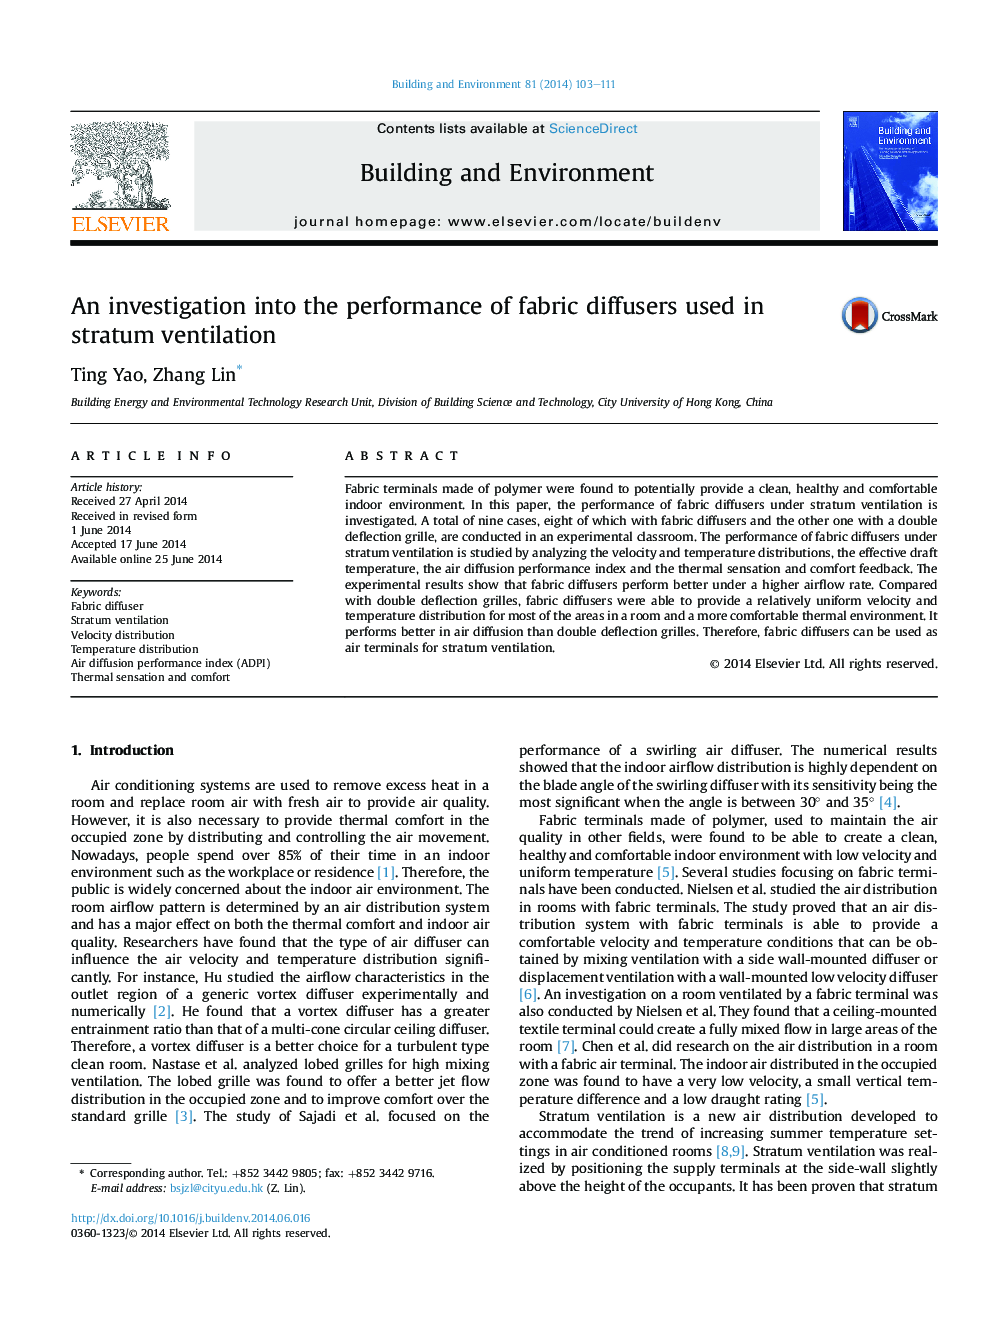 An investigation into the performance of fabric diffusers used in stratum ventilation